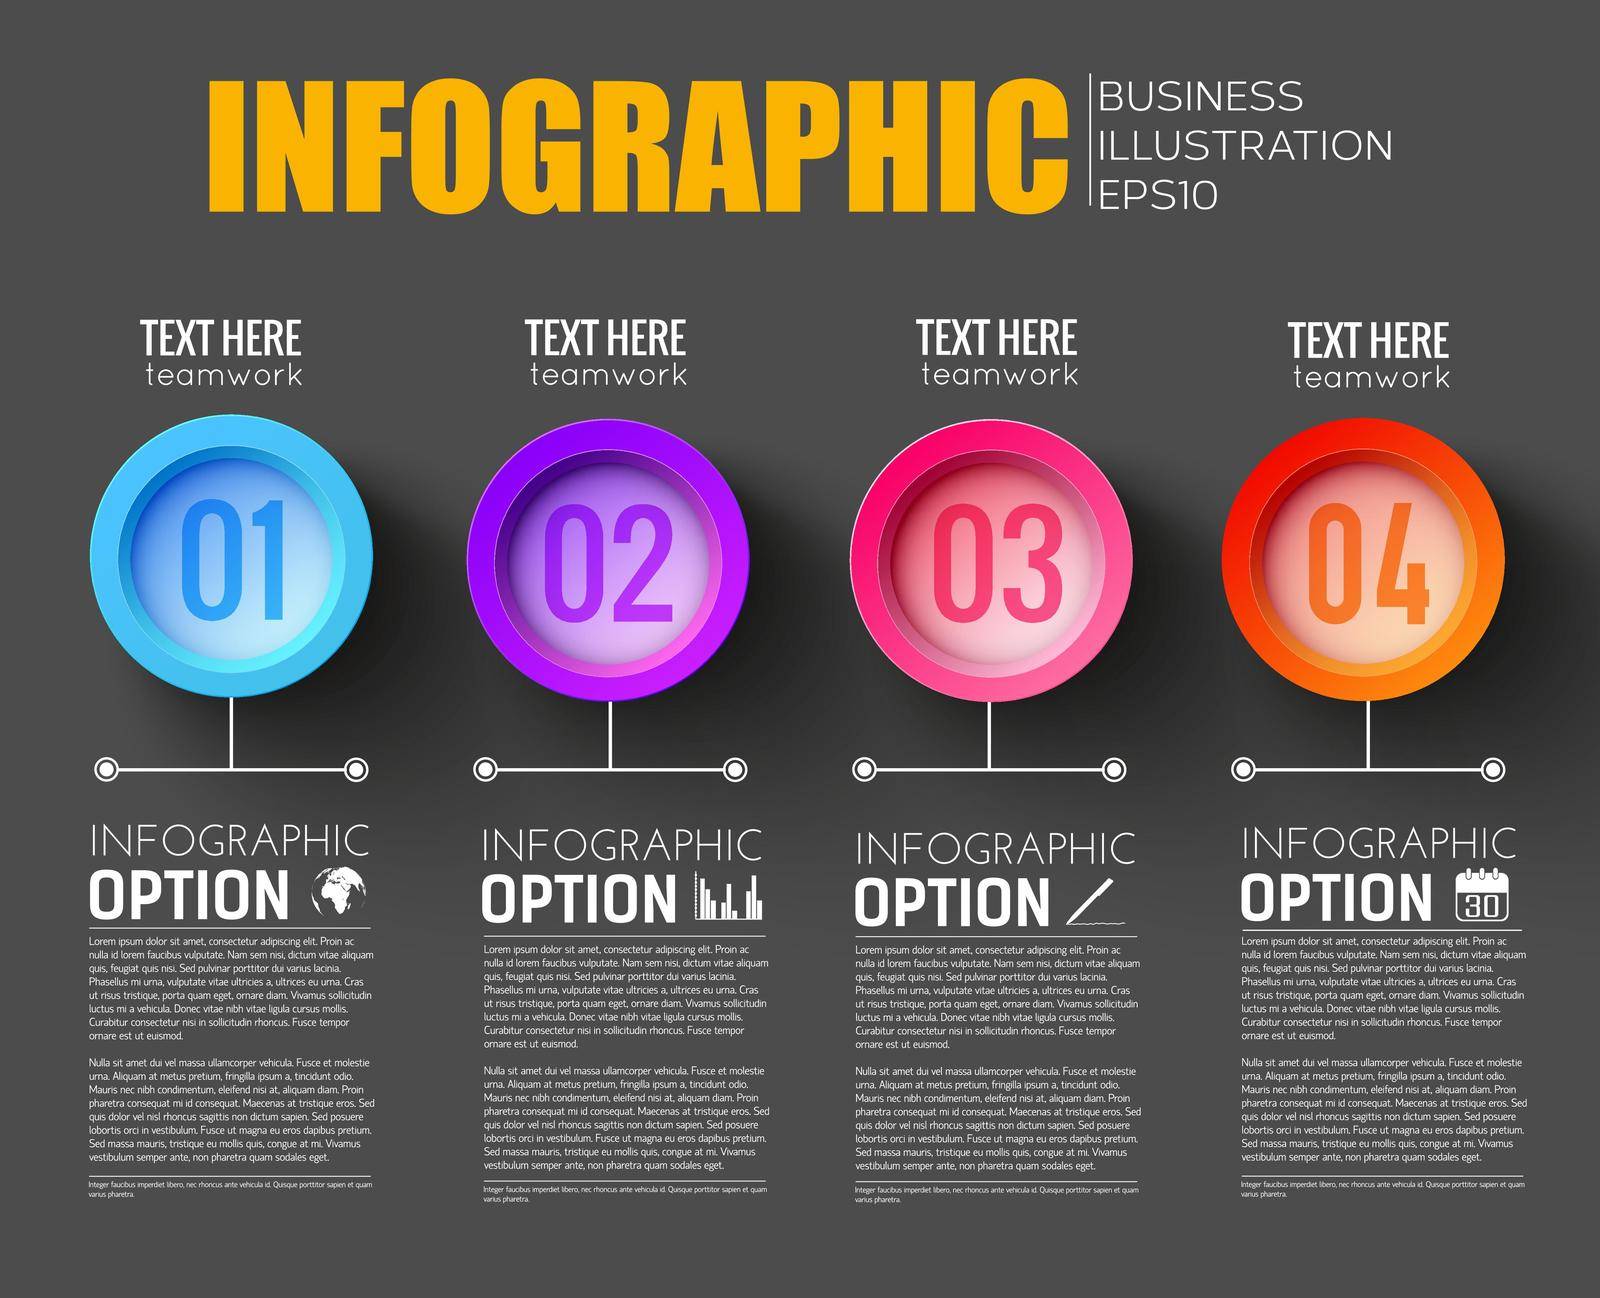 Teamwork infographic layout with description of four workflow options numbered by colored buttons on black background flat vector Illustration 